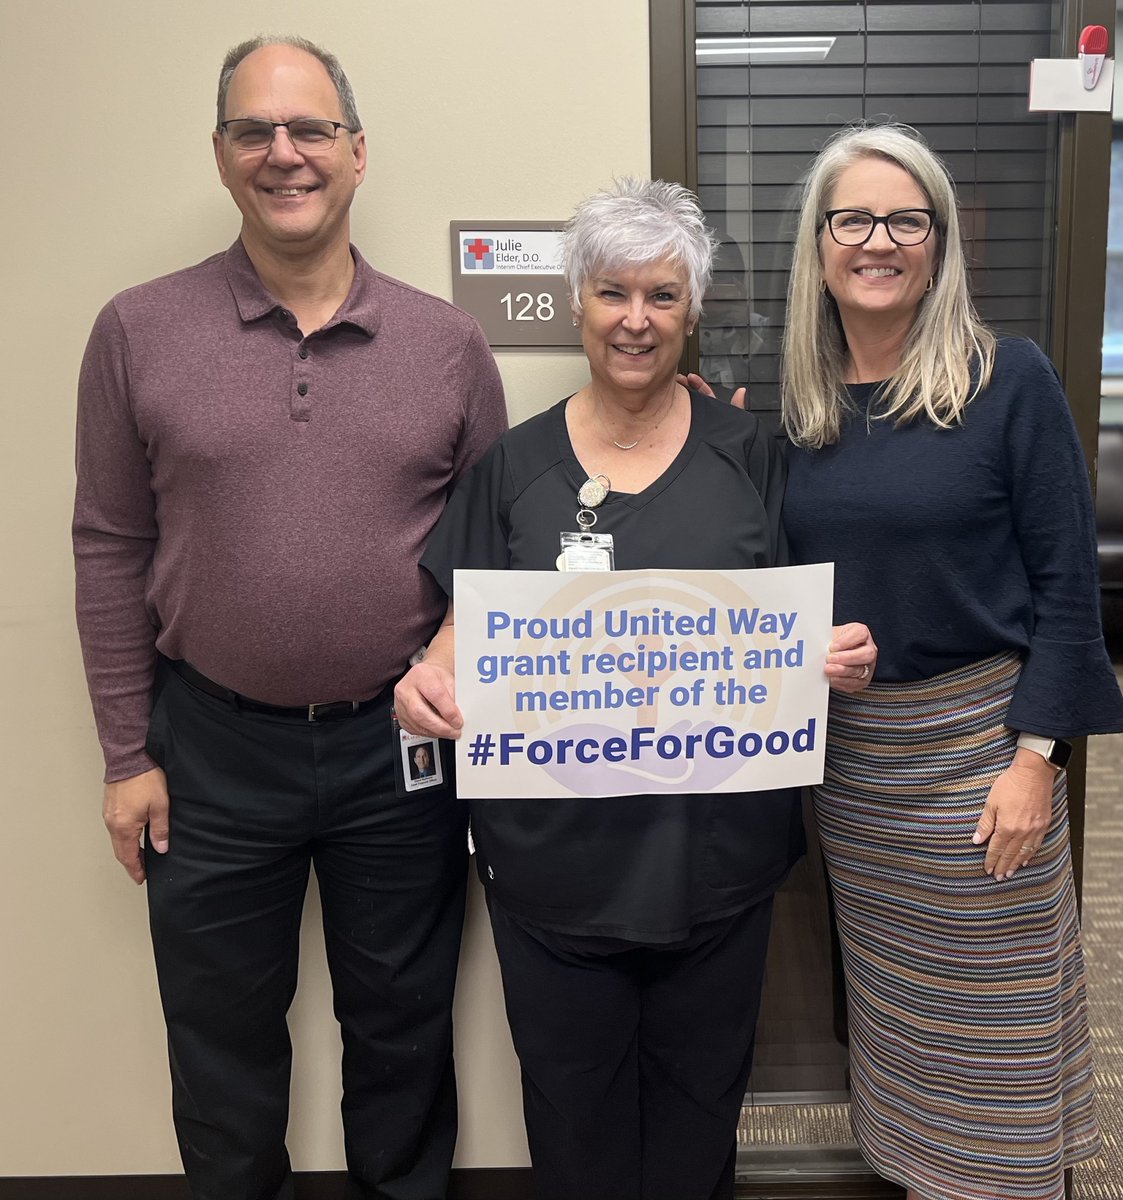 BIG NEWS! Thank you @UnitedWayPlains donors and our community for providing us with grant funding to help support our Dental Outreach Program which provides preventative oral health services to uninsured students. Together, we are a #ForceForGood!